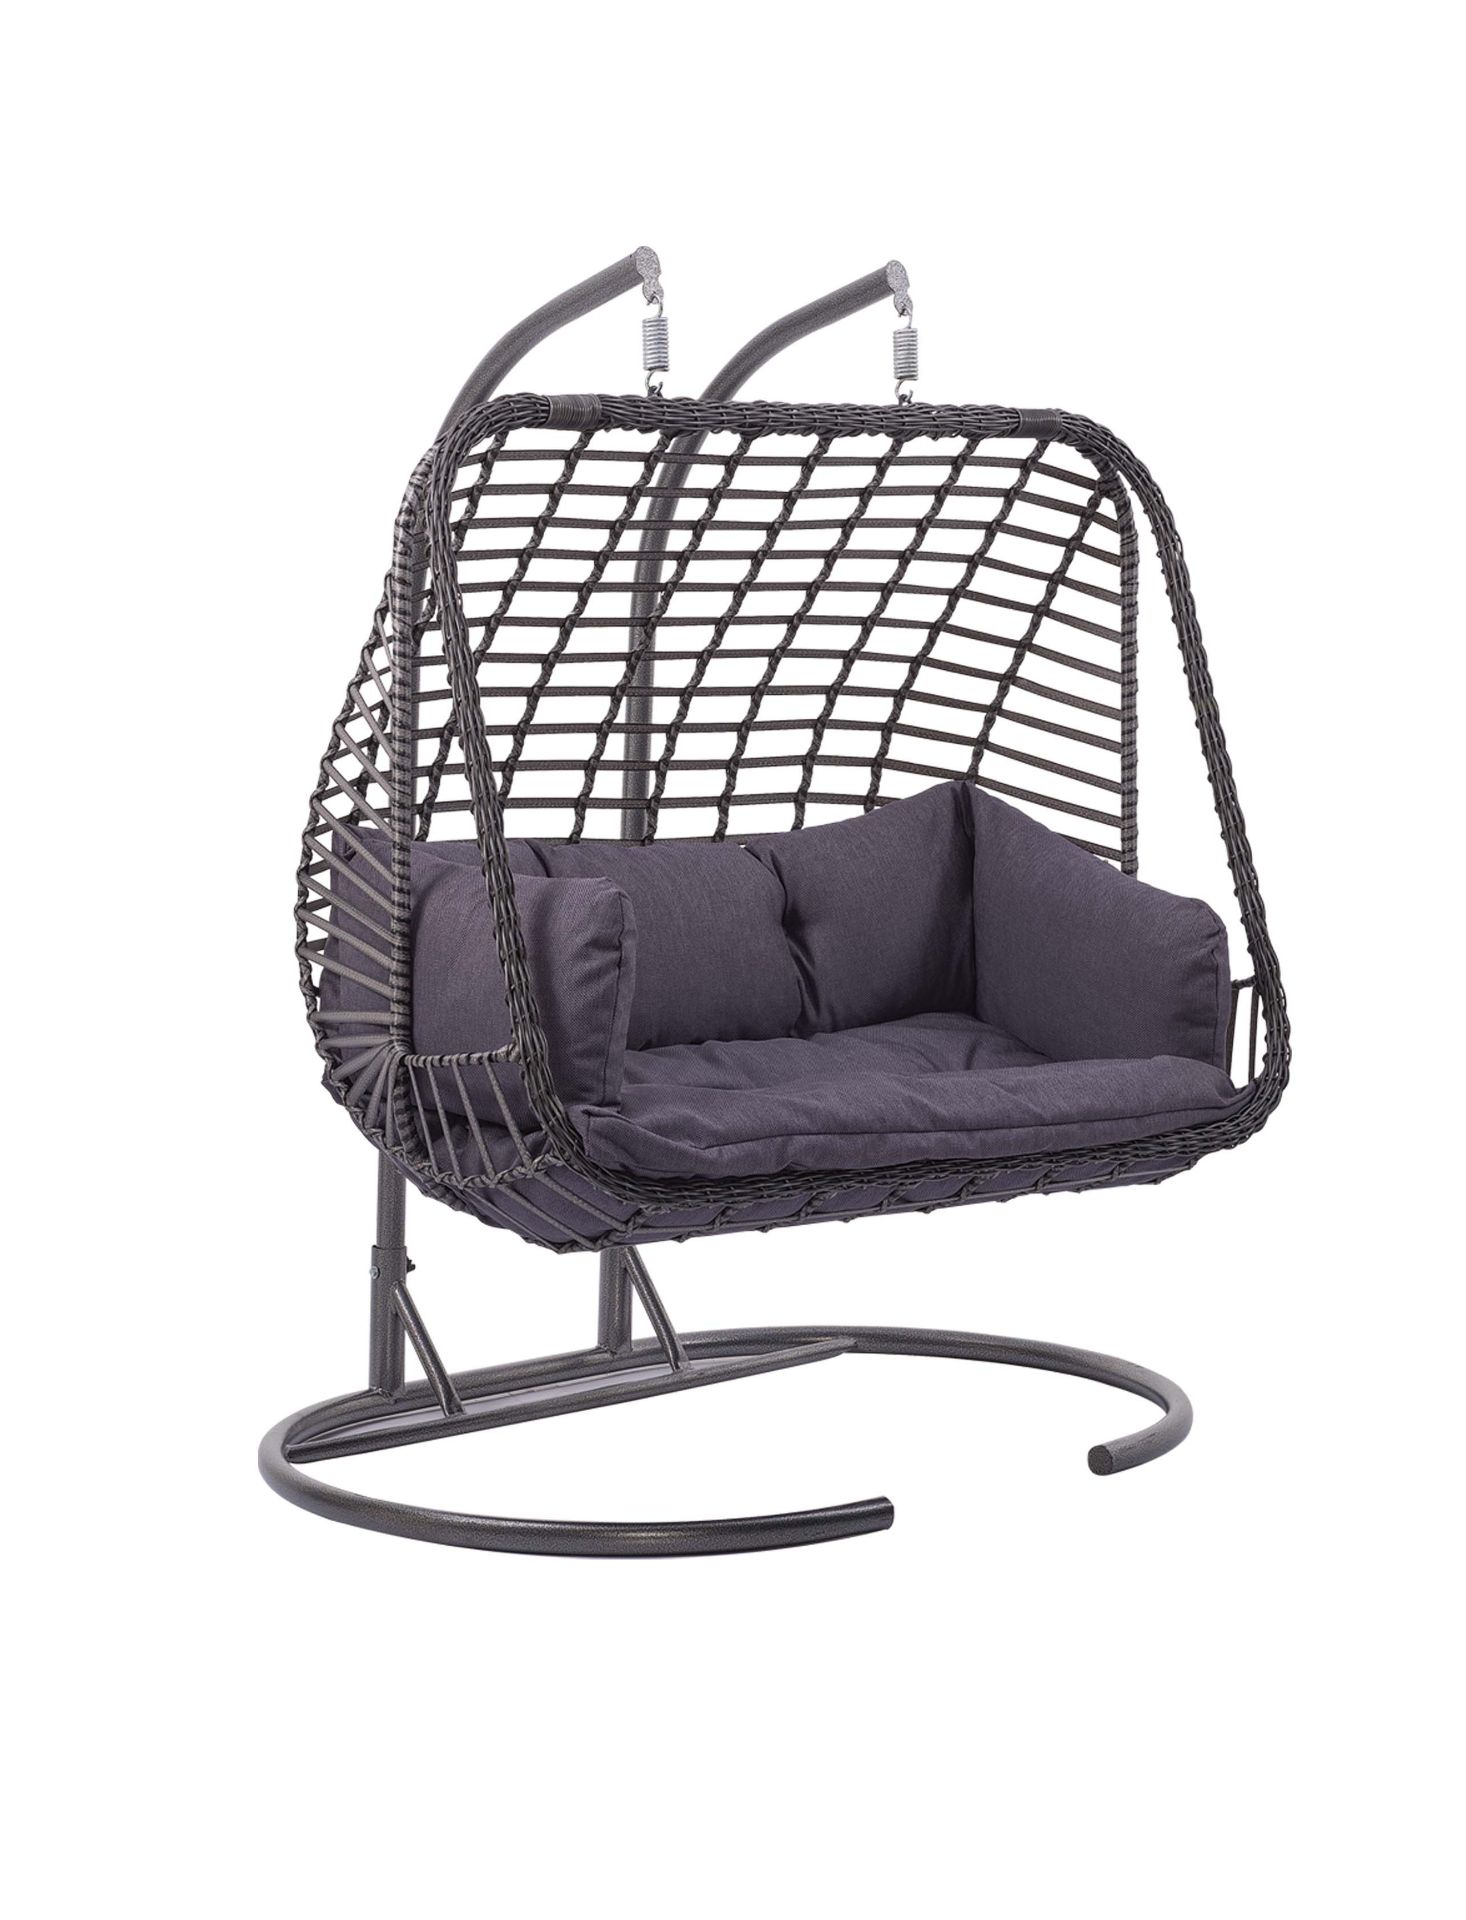 + VAT Brand New Chelsea Garden Company Rattan Double Hanging Swing Chair - Item is Available Approx